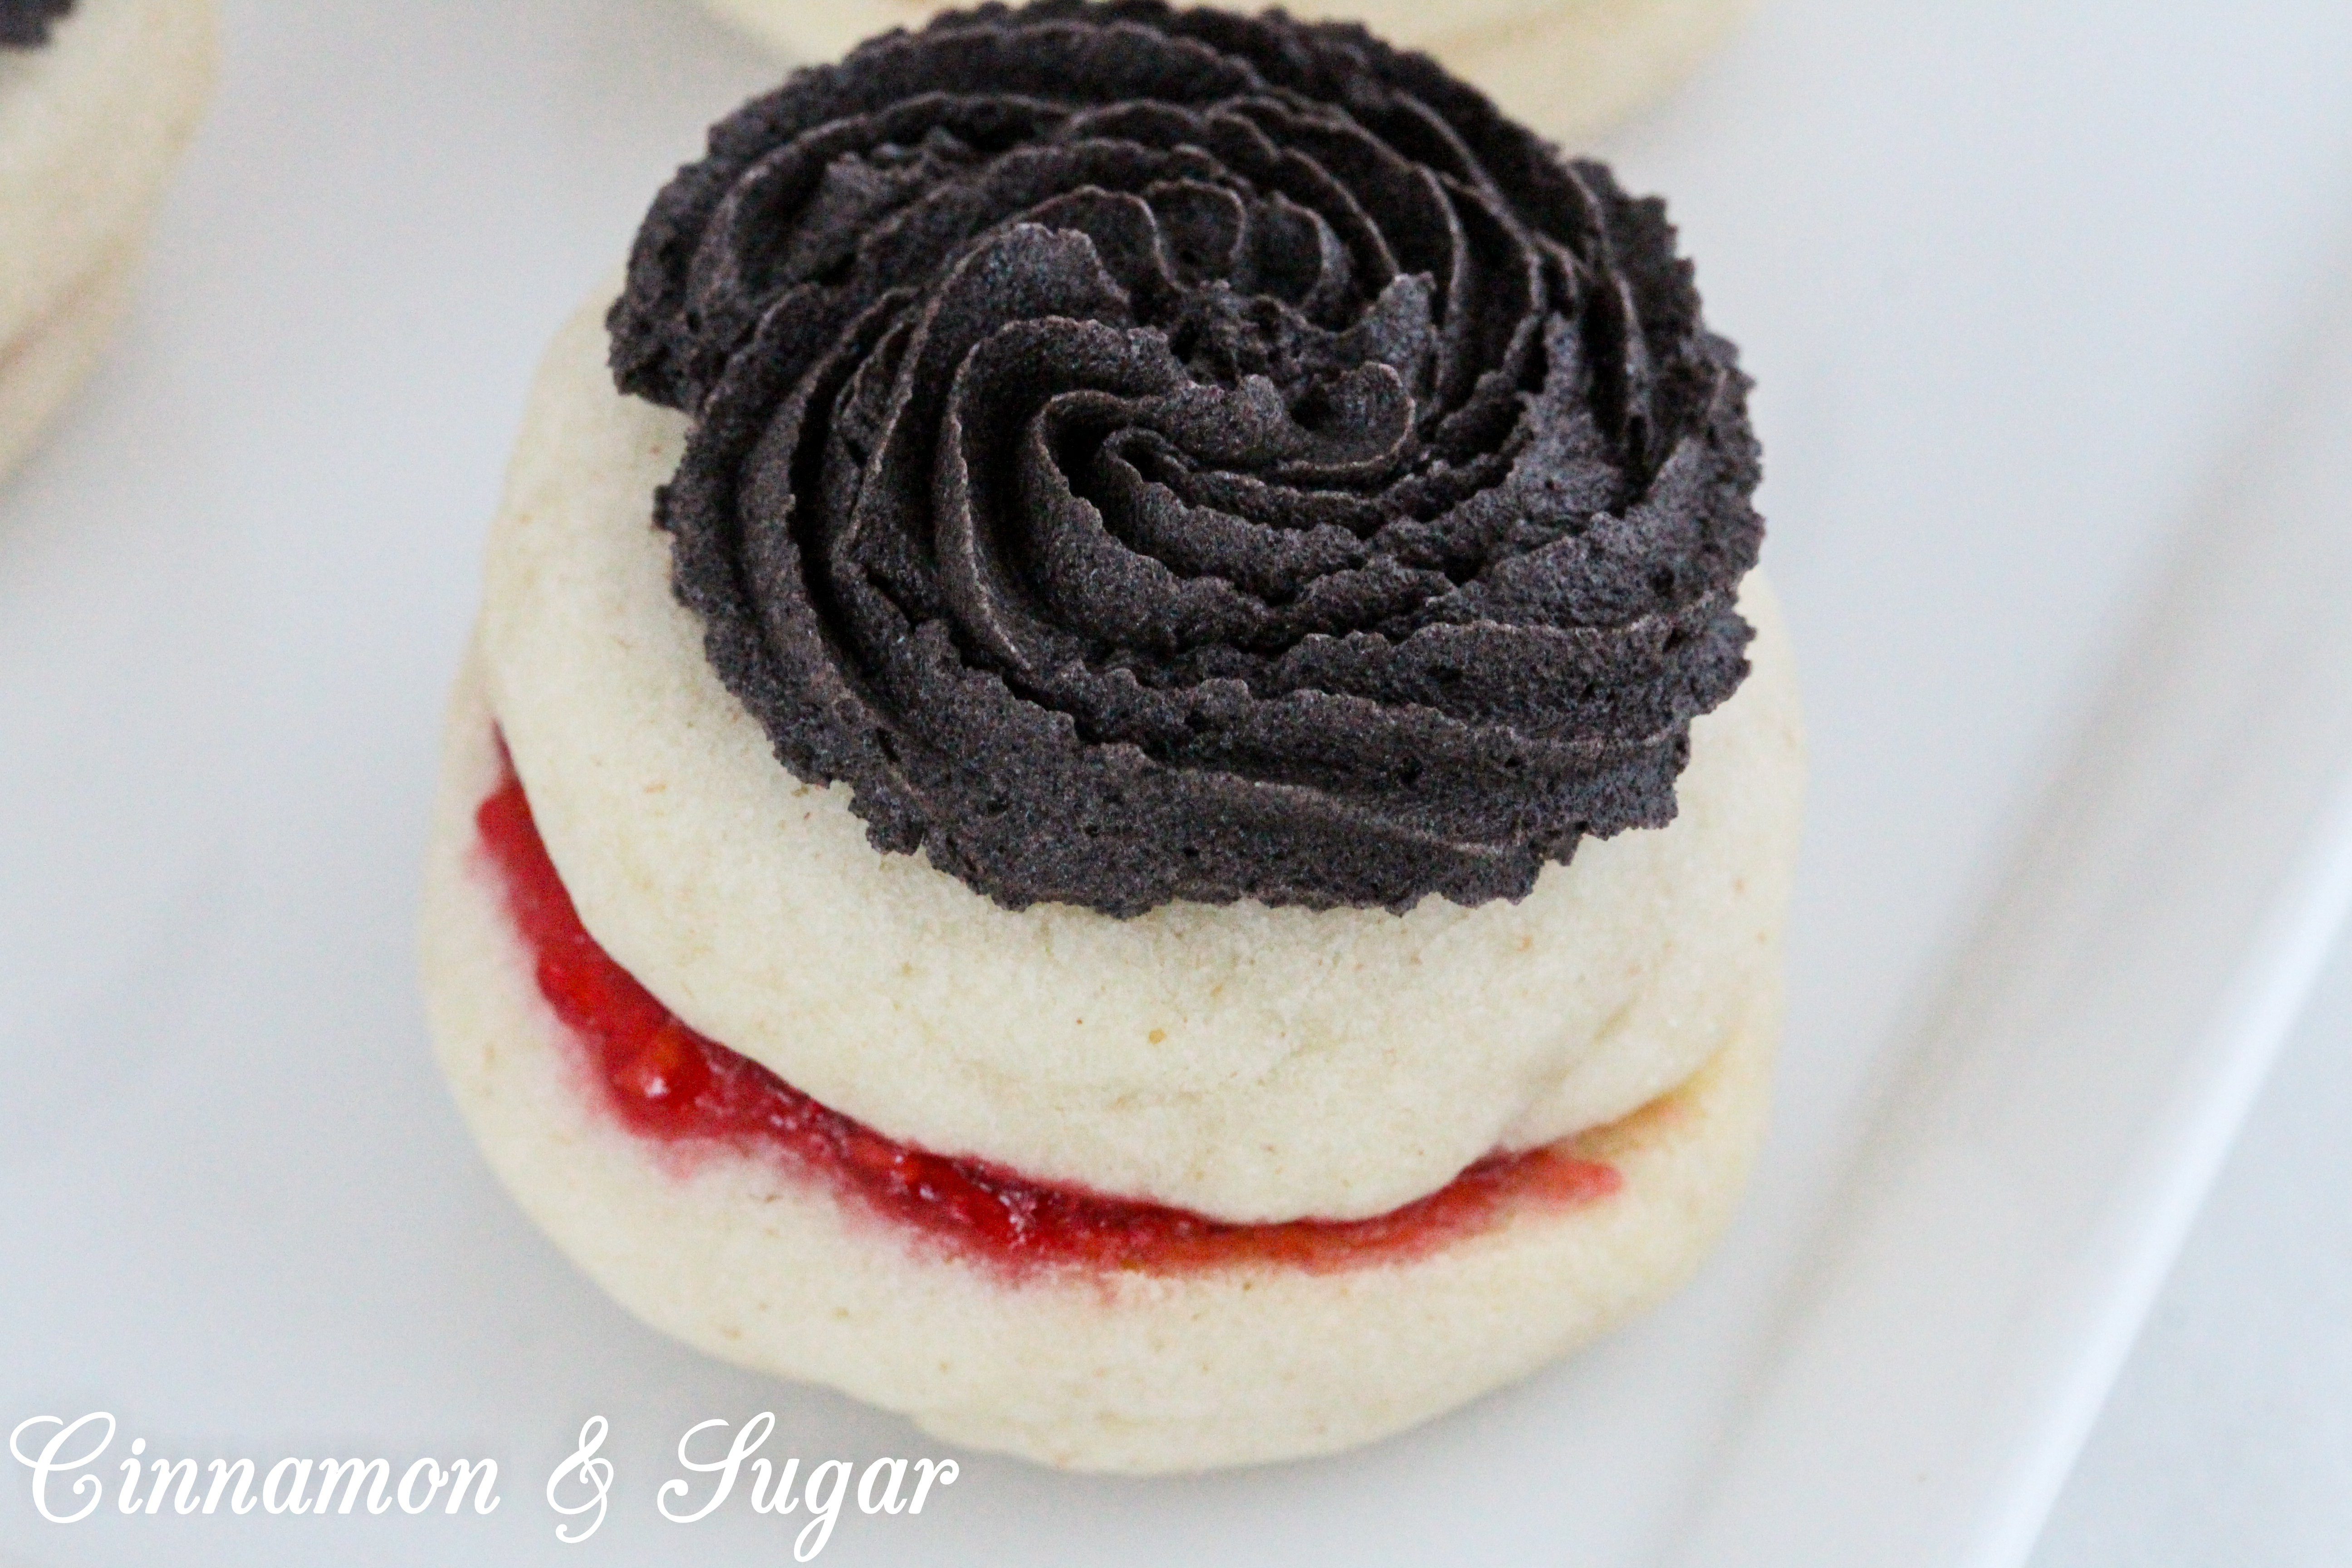 Mom’s Antoinettes are buttery, almond-flavored shortbread-style cookies that are sandwiched around raspberry jam and topped with dark chocolate buttercream. Recipe shared with permission granted by Ellie Alexander, author of A CUP OF HOLIDAY FEAR. 